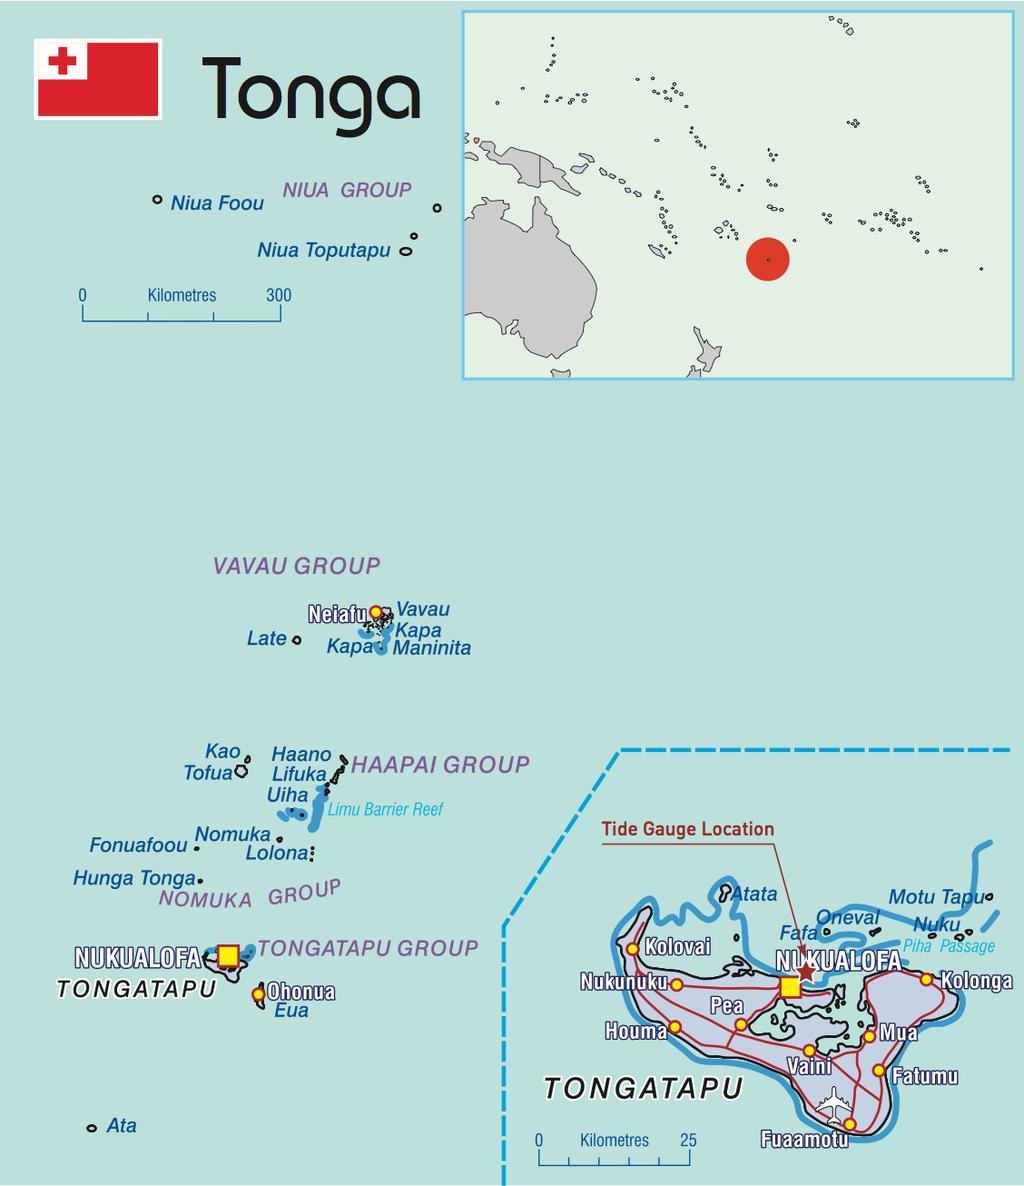 1. RIDGE TO REEF CONTEXT Country: Tonga Population: 106,000 Population growth: 0.19% Density: 144/km 2 GDP: USD 471 million Growth Rate: 0.